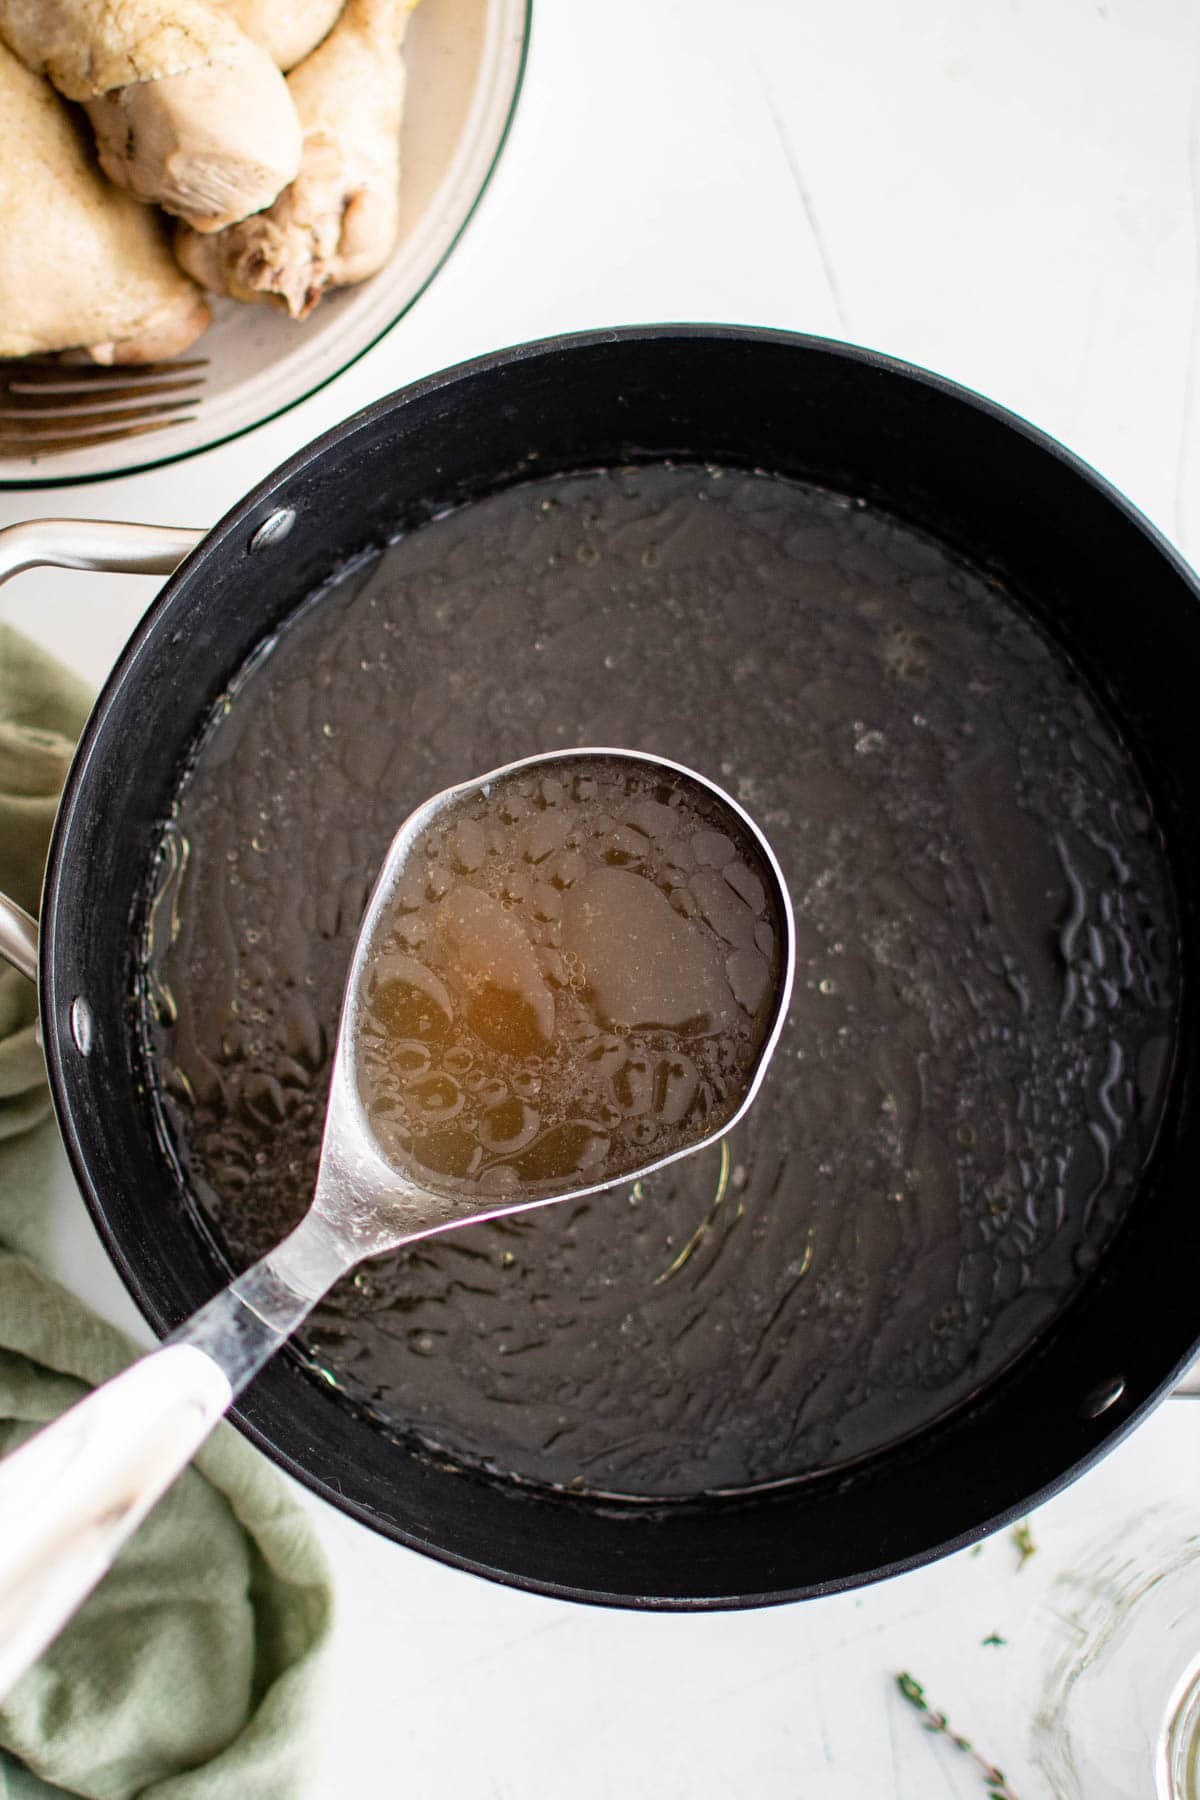 Clear chicken broth in a ladle over a pot.